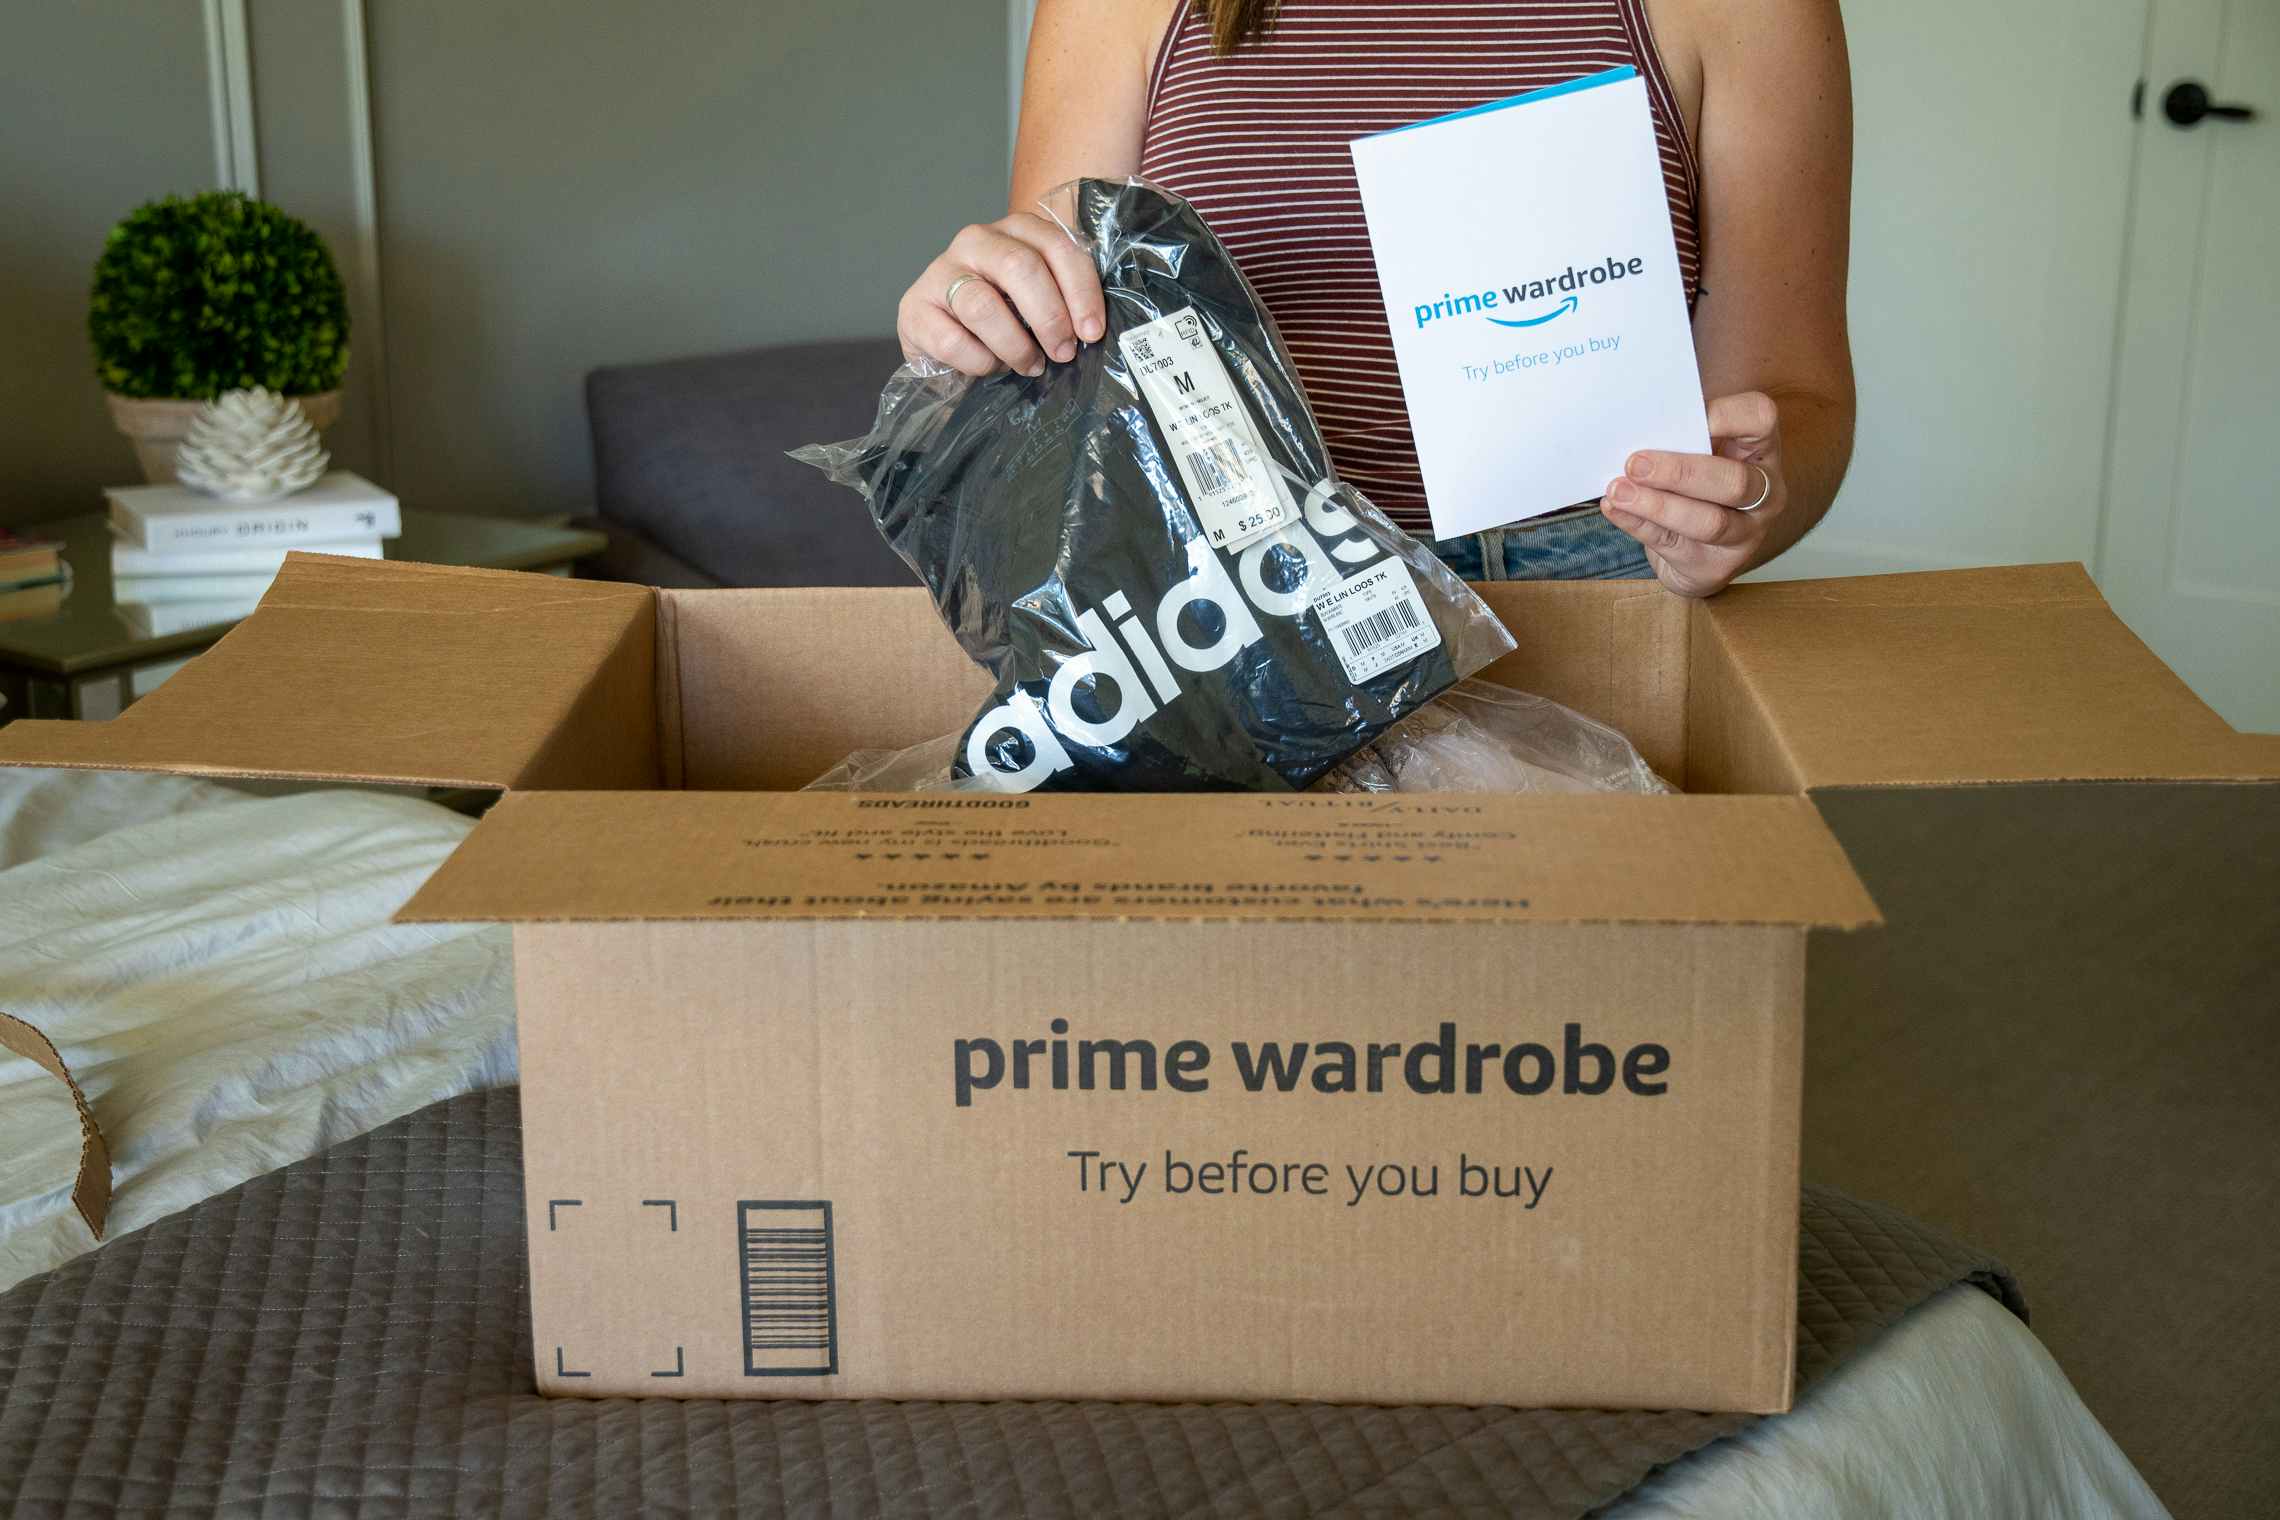 A woman pulling an adidas tank top and amazon wardrobe pamphlet from a box.